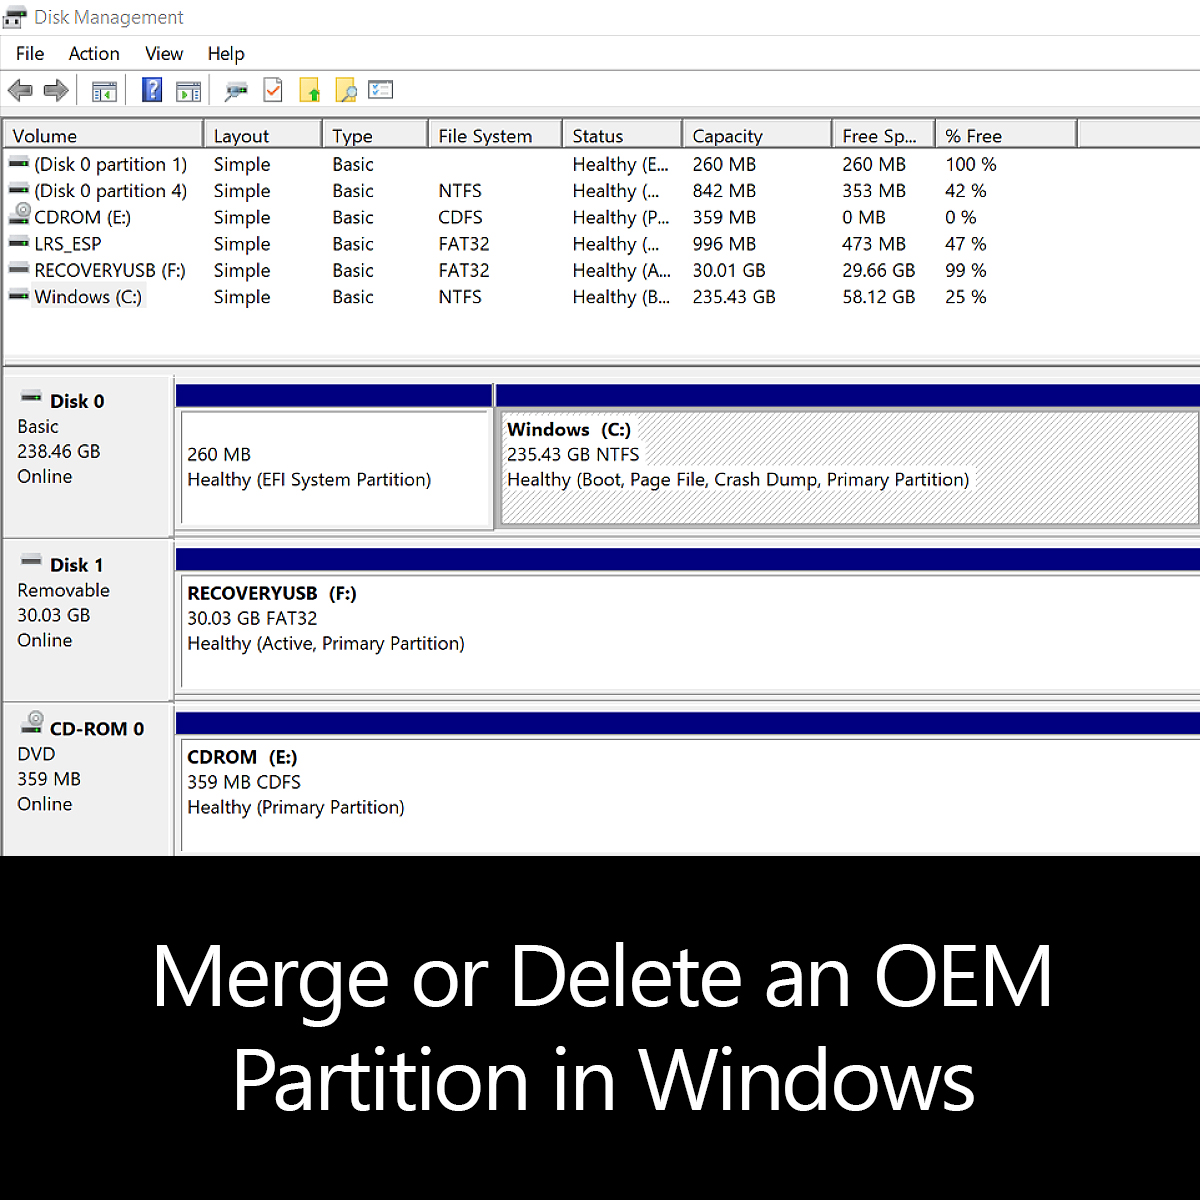 oem partition running out of space